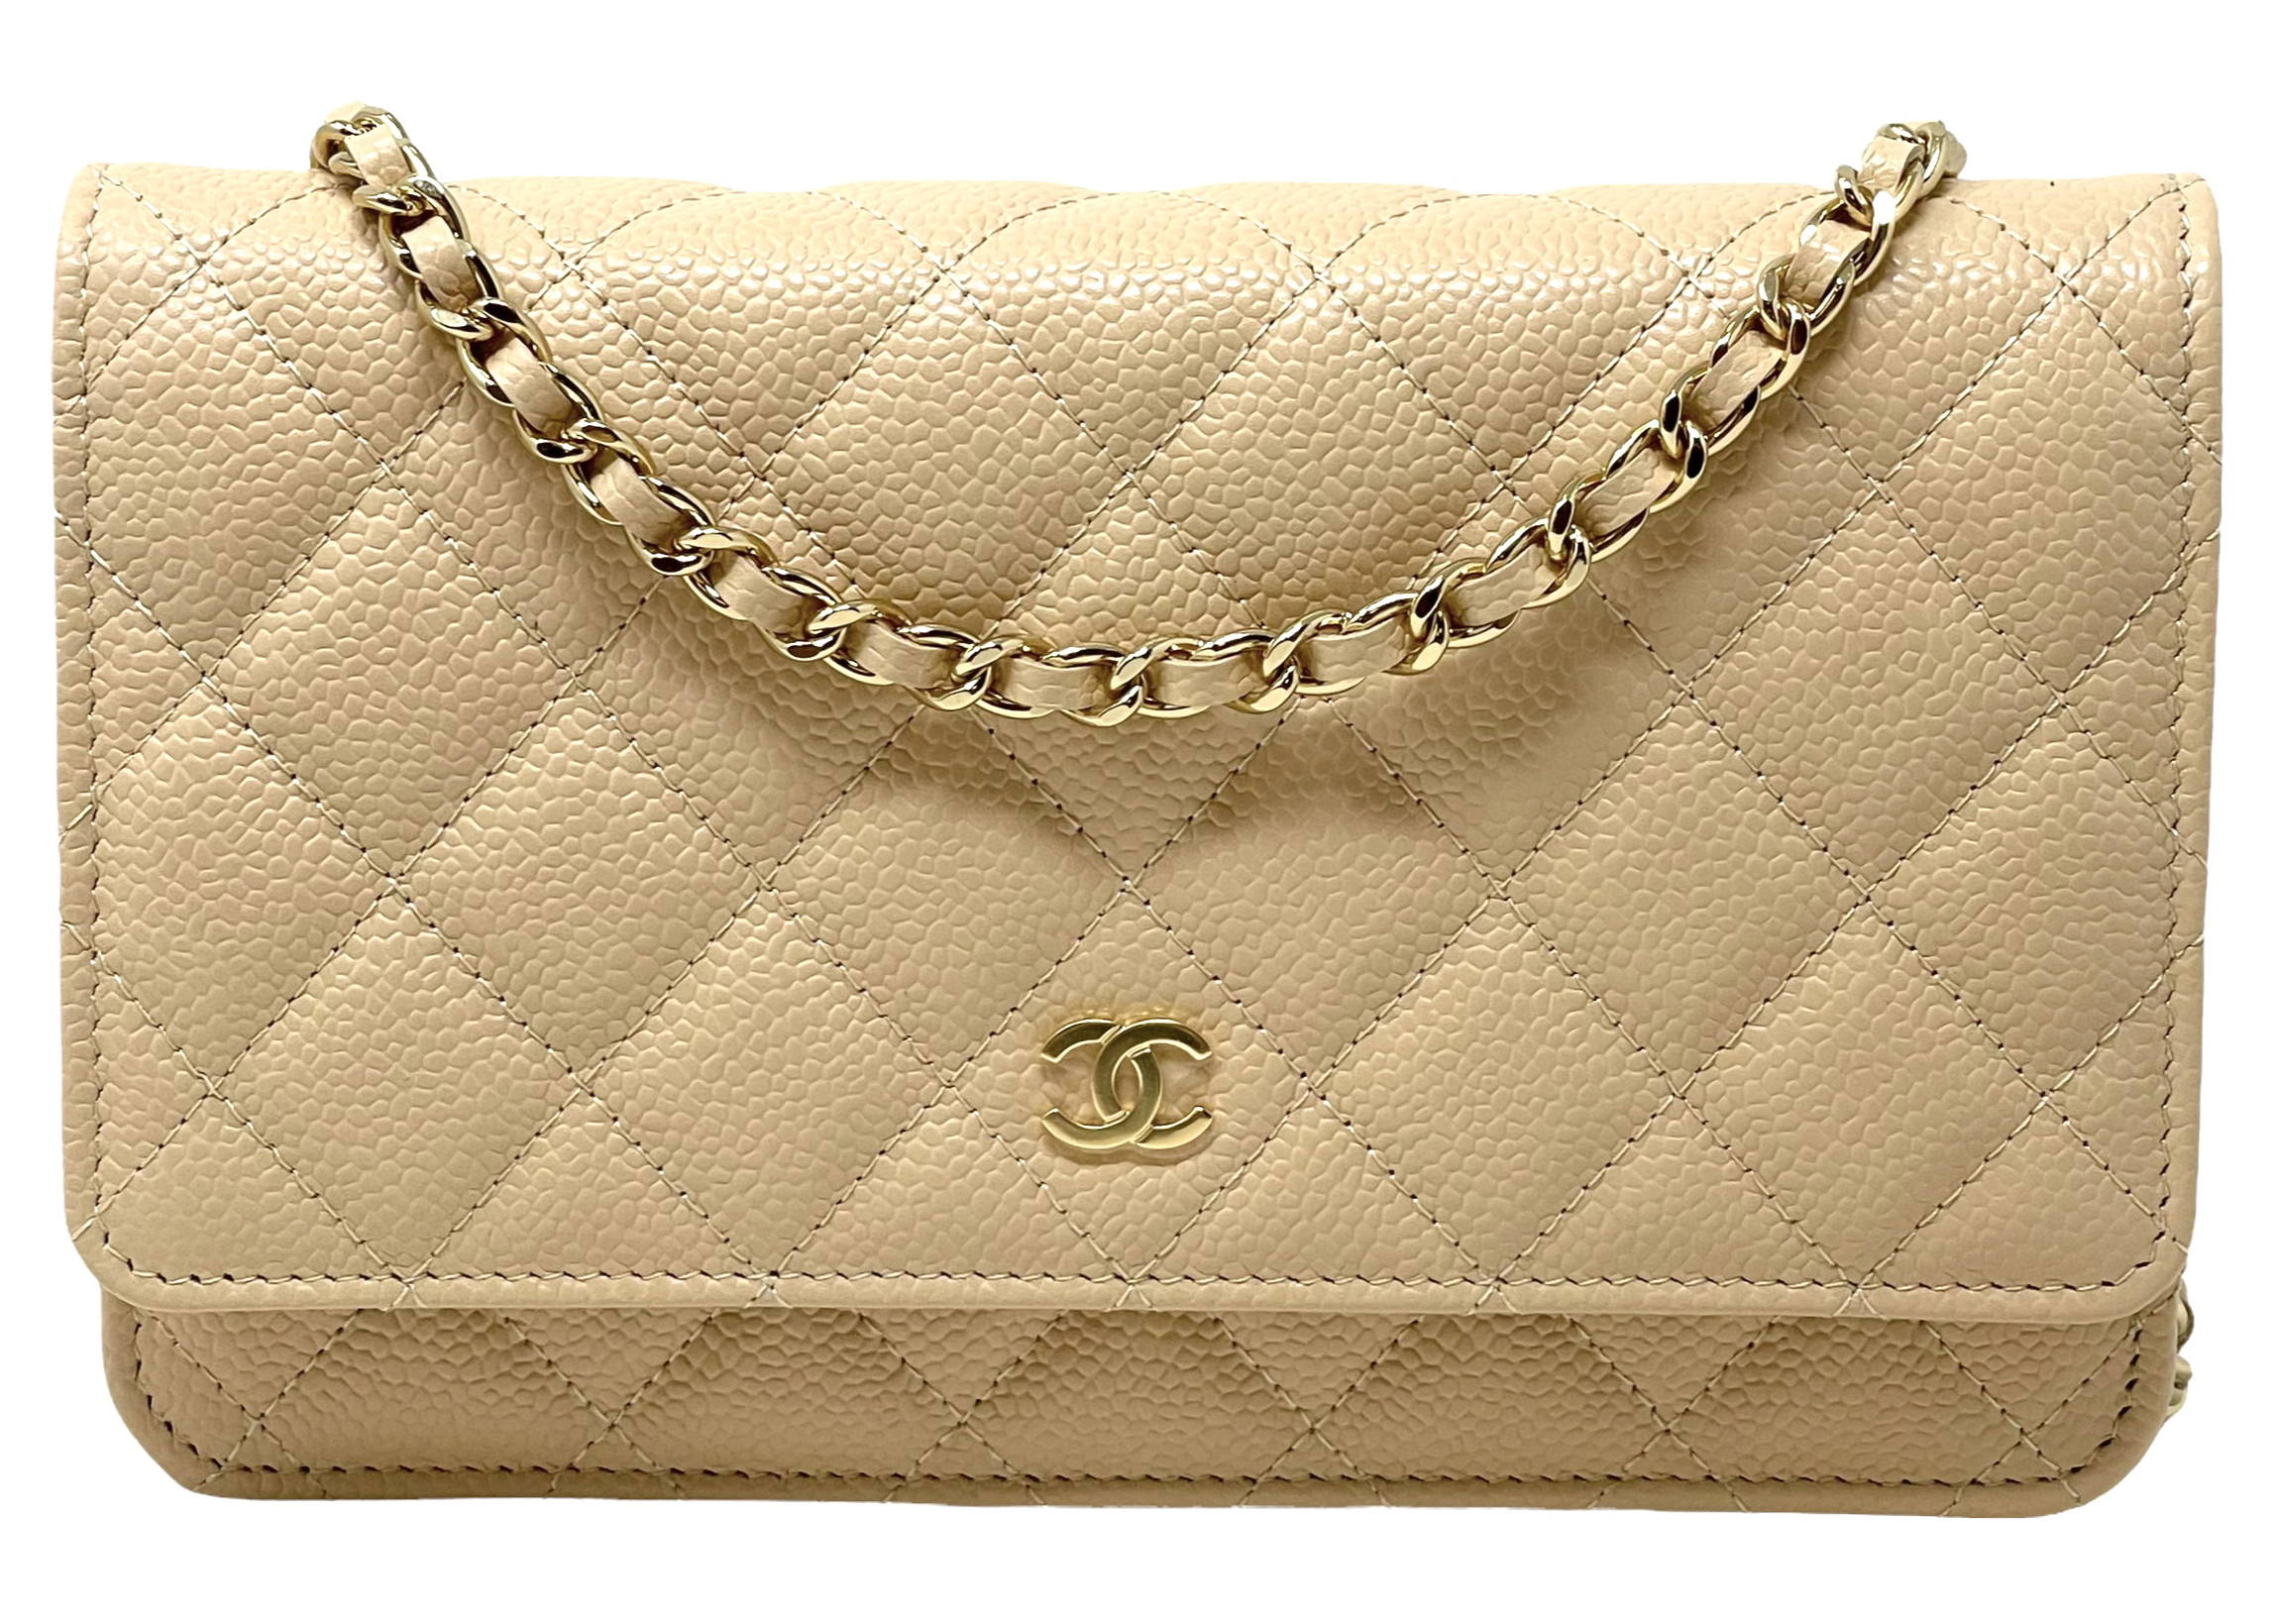 Chanel Classic WOC Wallet on Chain in Black Caviar with Gold Hardware  SOLD